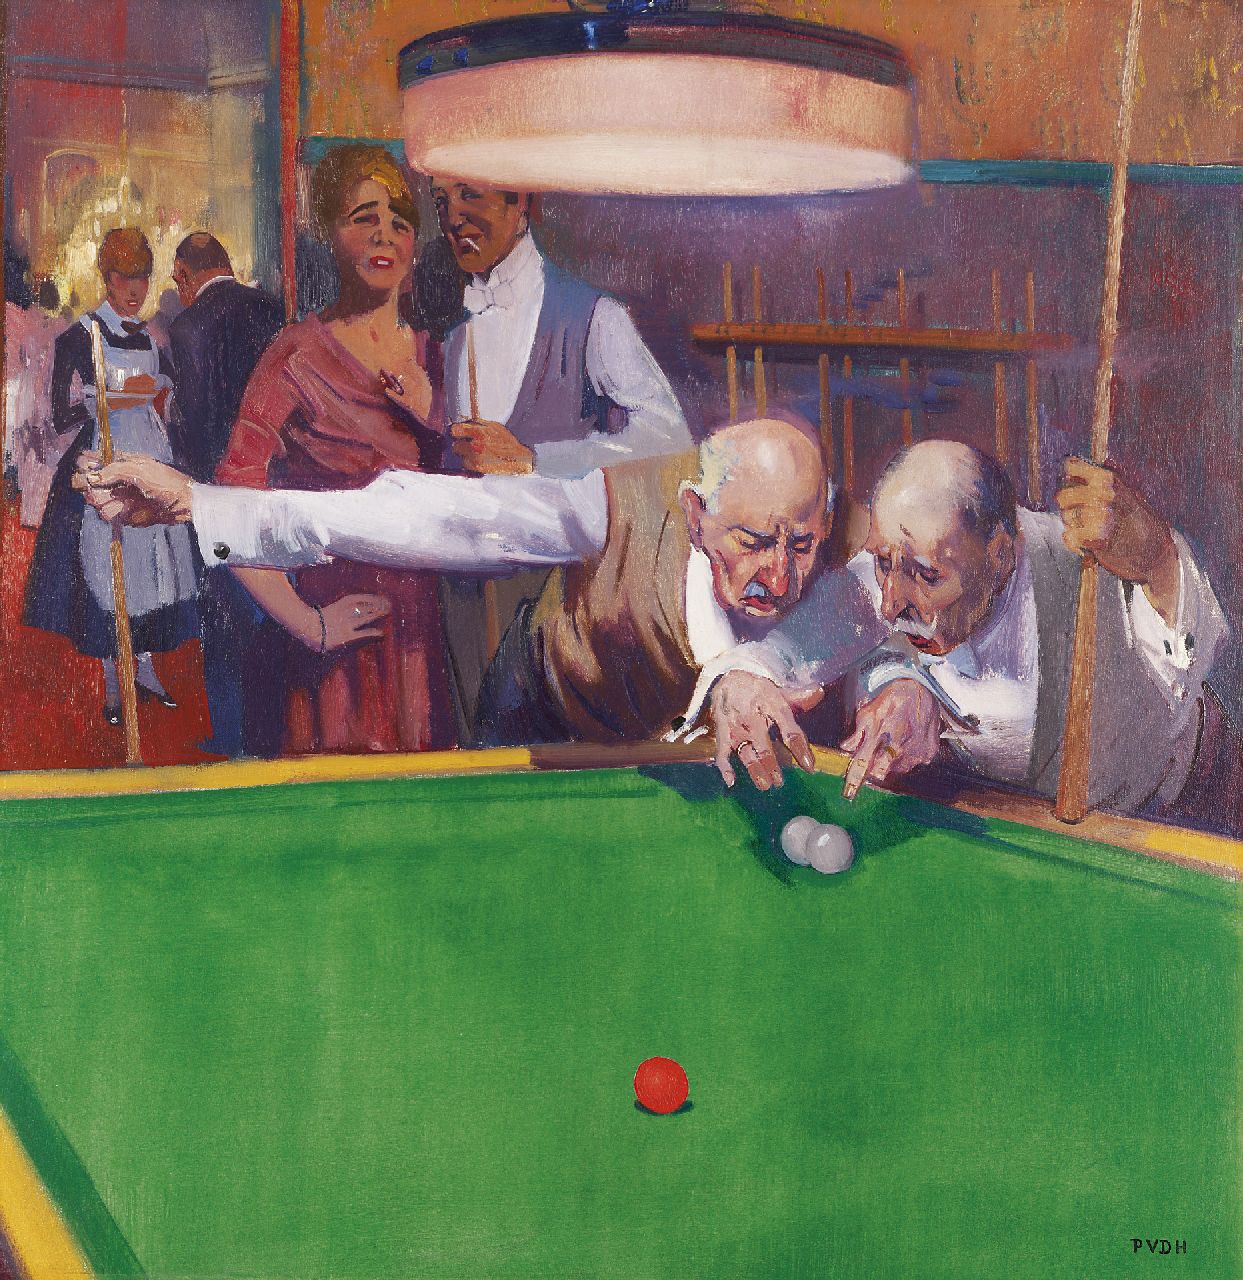 Hem P. van der | Pieter 'Piet' van der Hem, Discussing a game of billiards, oil on canvas 79.8 x 76.7 cm, signed l.r. and with initials and painted ca. 1919